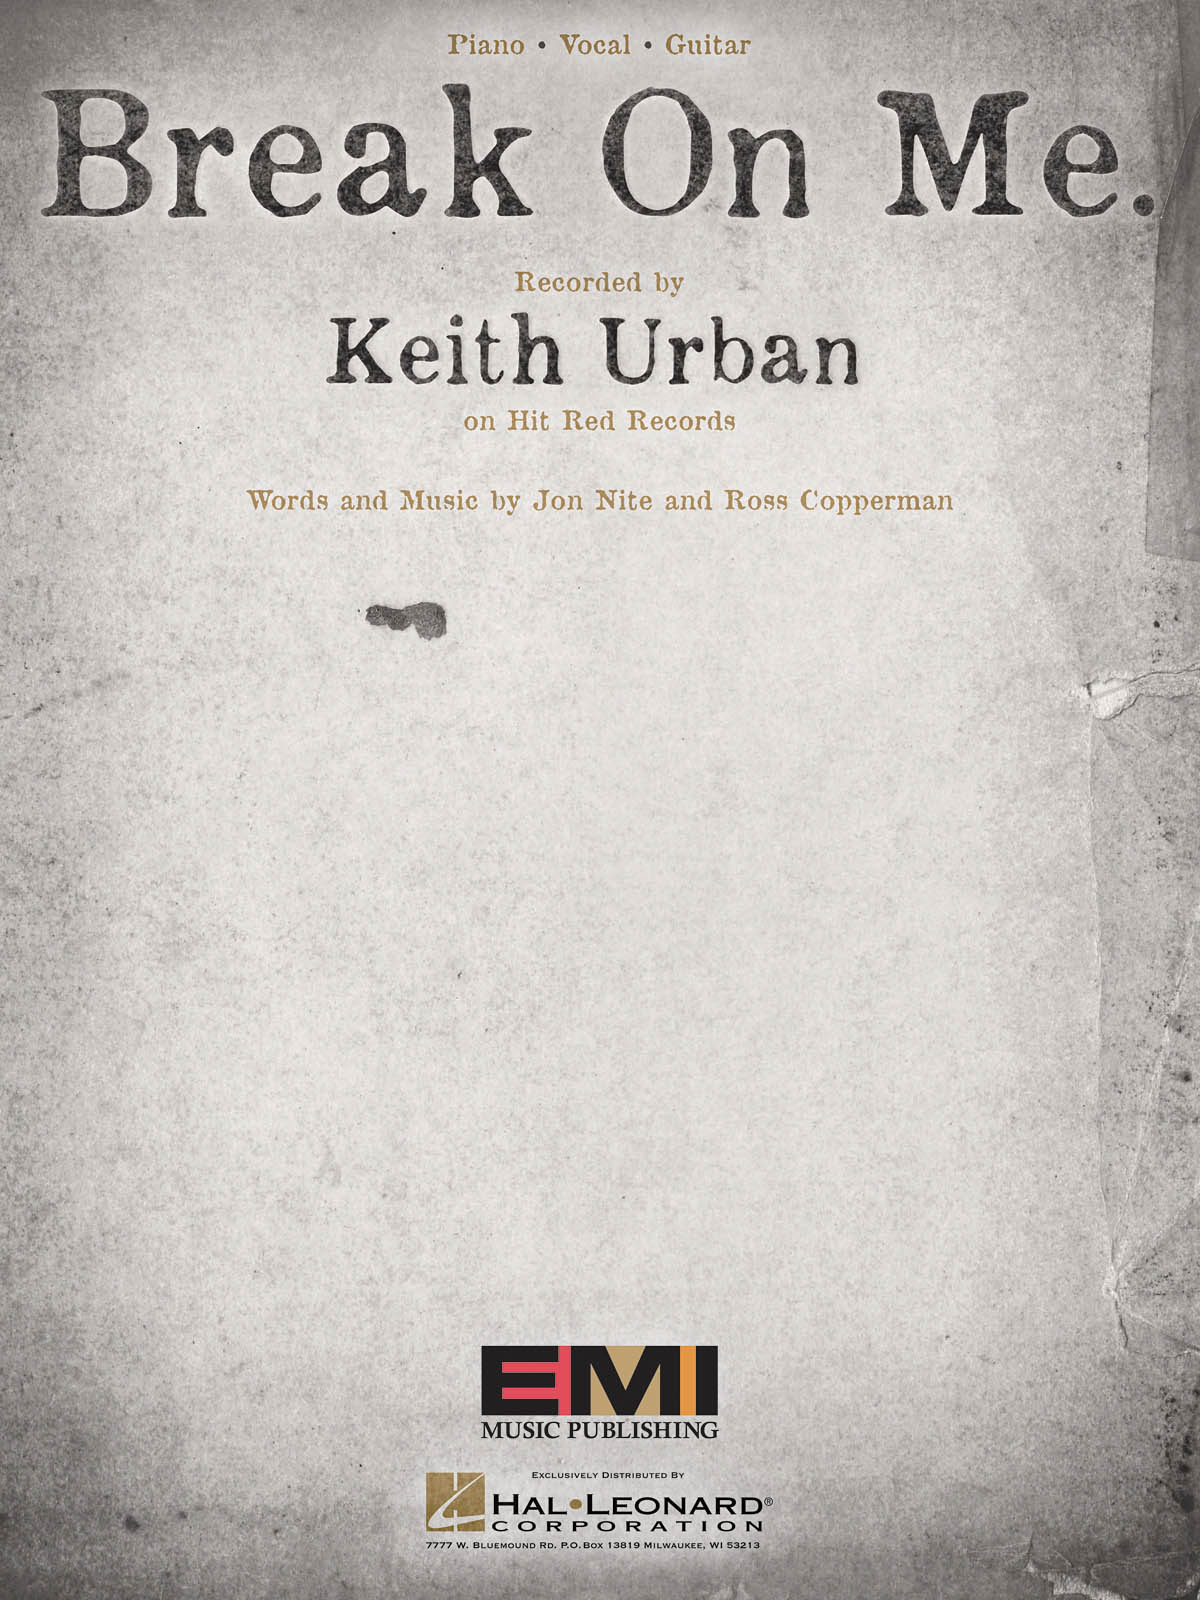 Keith Urban: Break on Me.: Piano  Vocal and Guitar: Single Sheet